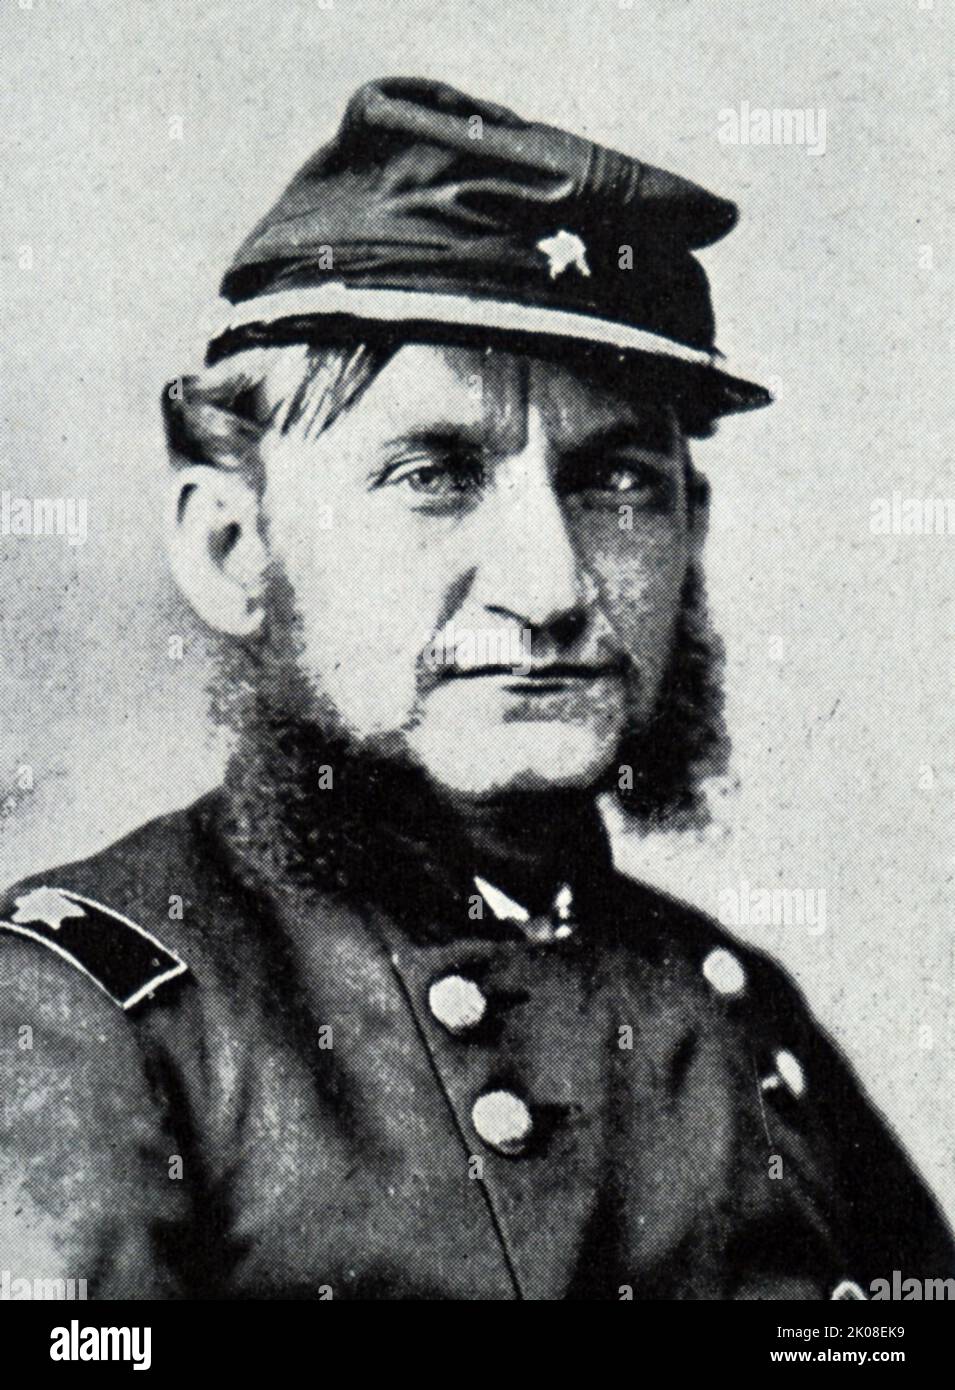 Major General Hugh Judson Kilpatrick (January 14, 1836 - December 4, 1881) was an officer in the Union Army during the American Civil War. He was later the United States Minister to Chile and an unsuccessful candidate for the U.S. House of Representatives. Major General Hugh Judson Kilpatrick and staff Stock Photo